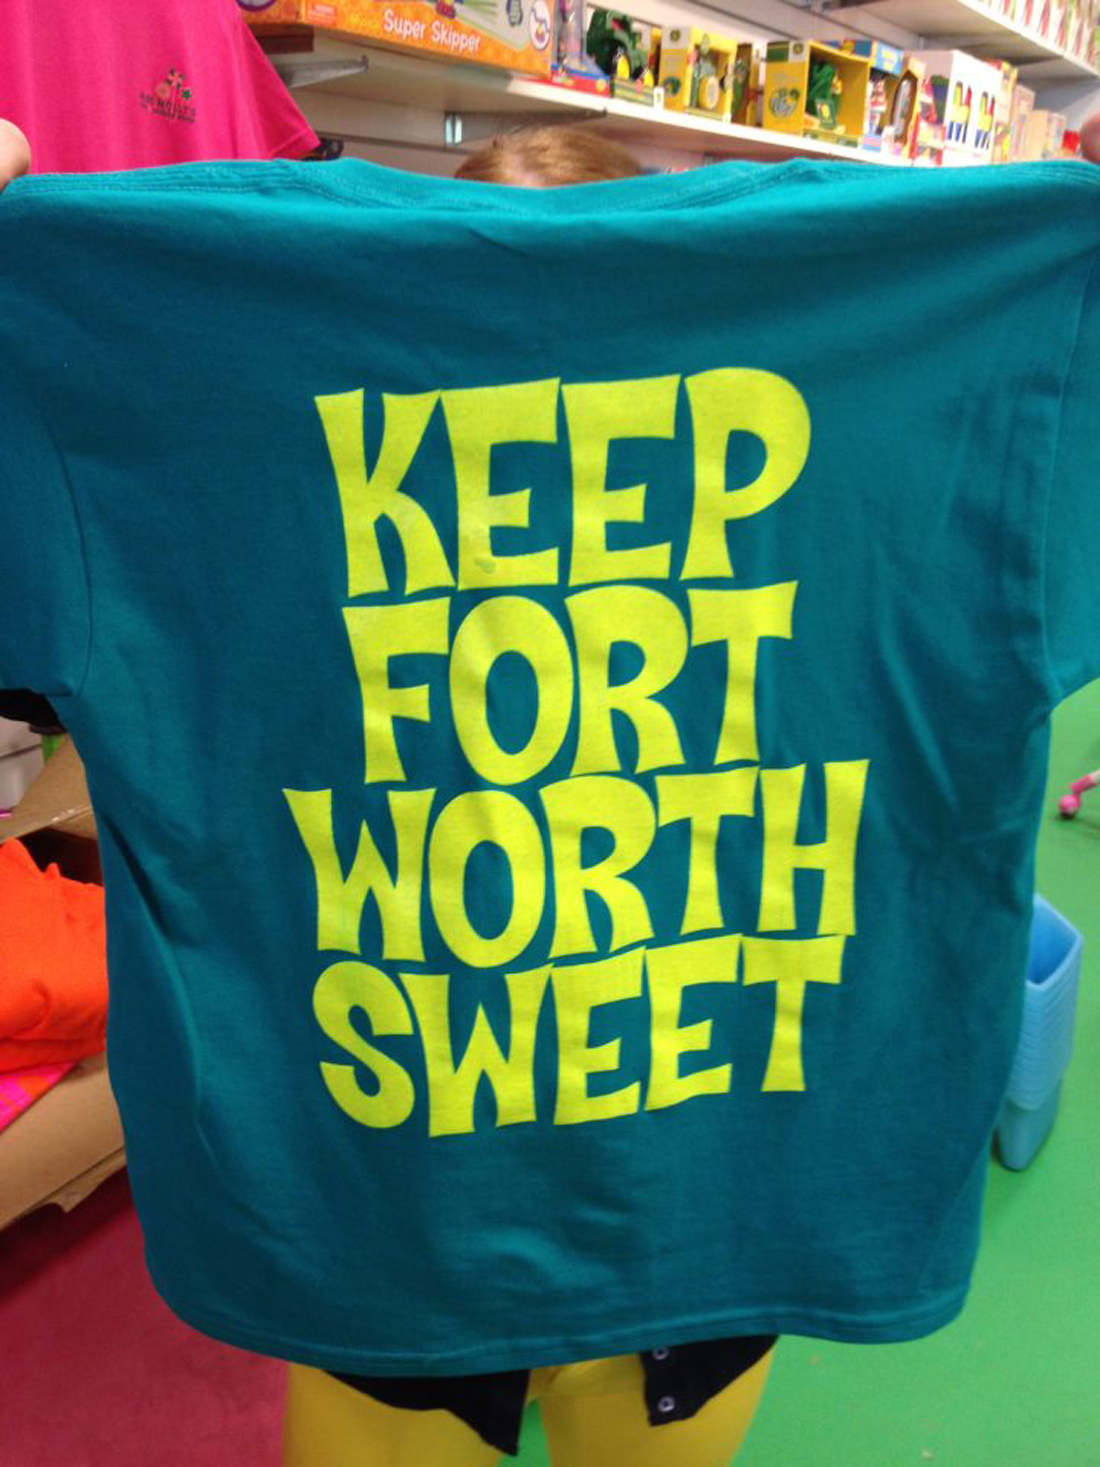 Snag one of these t-shirts from Miss Molly’s Toy and Candy Shop, Sat.